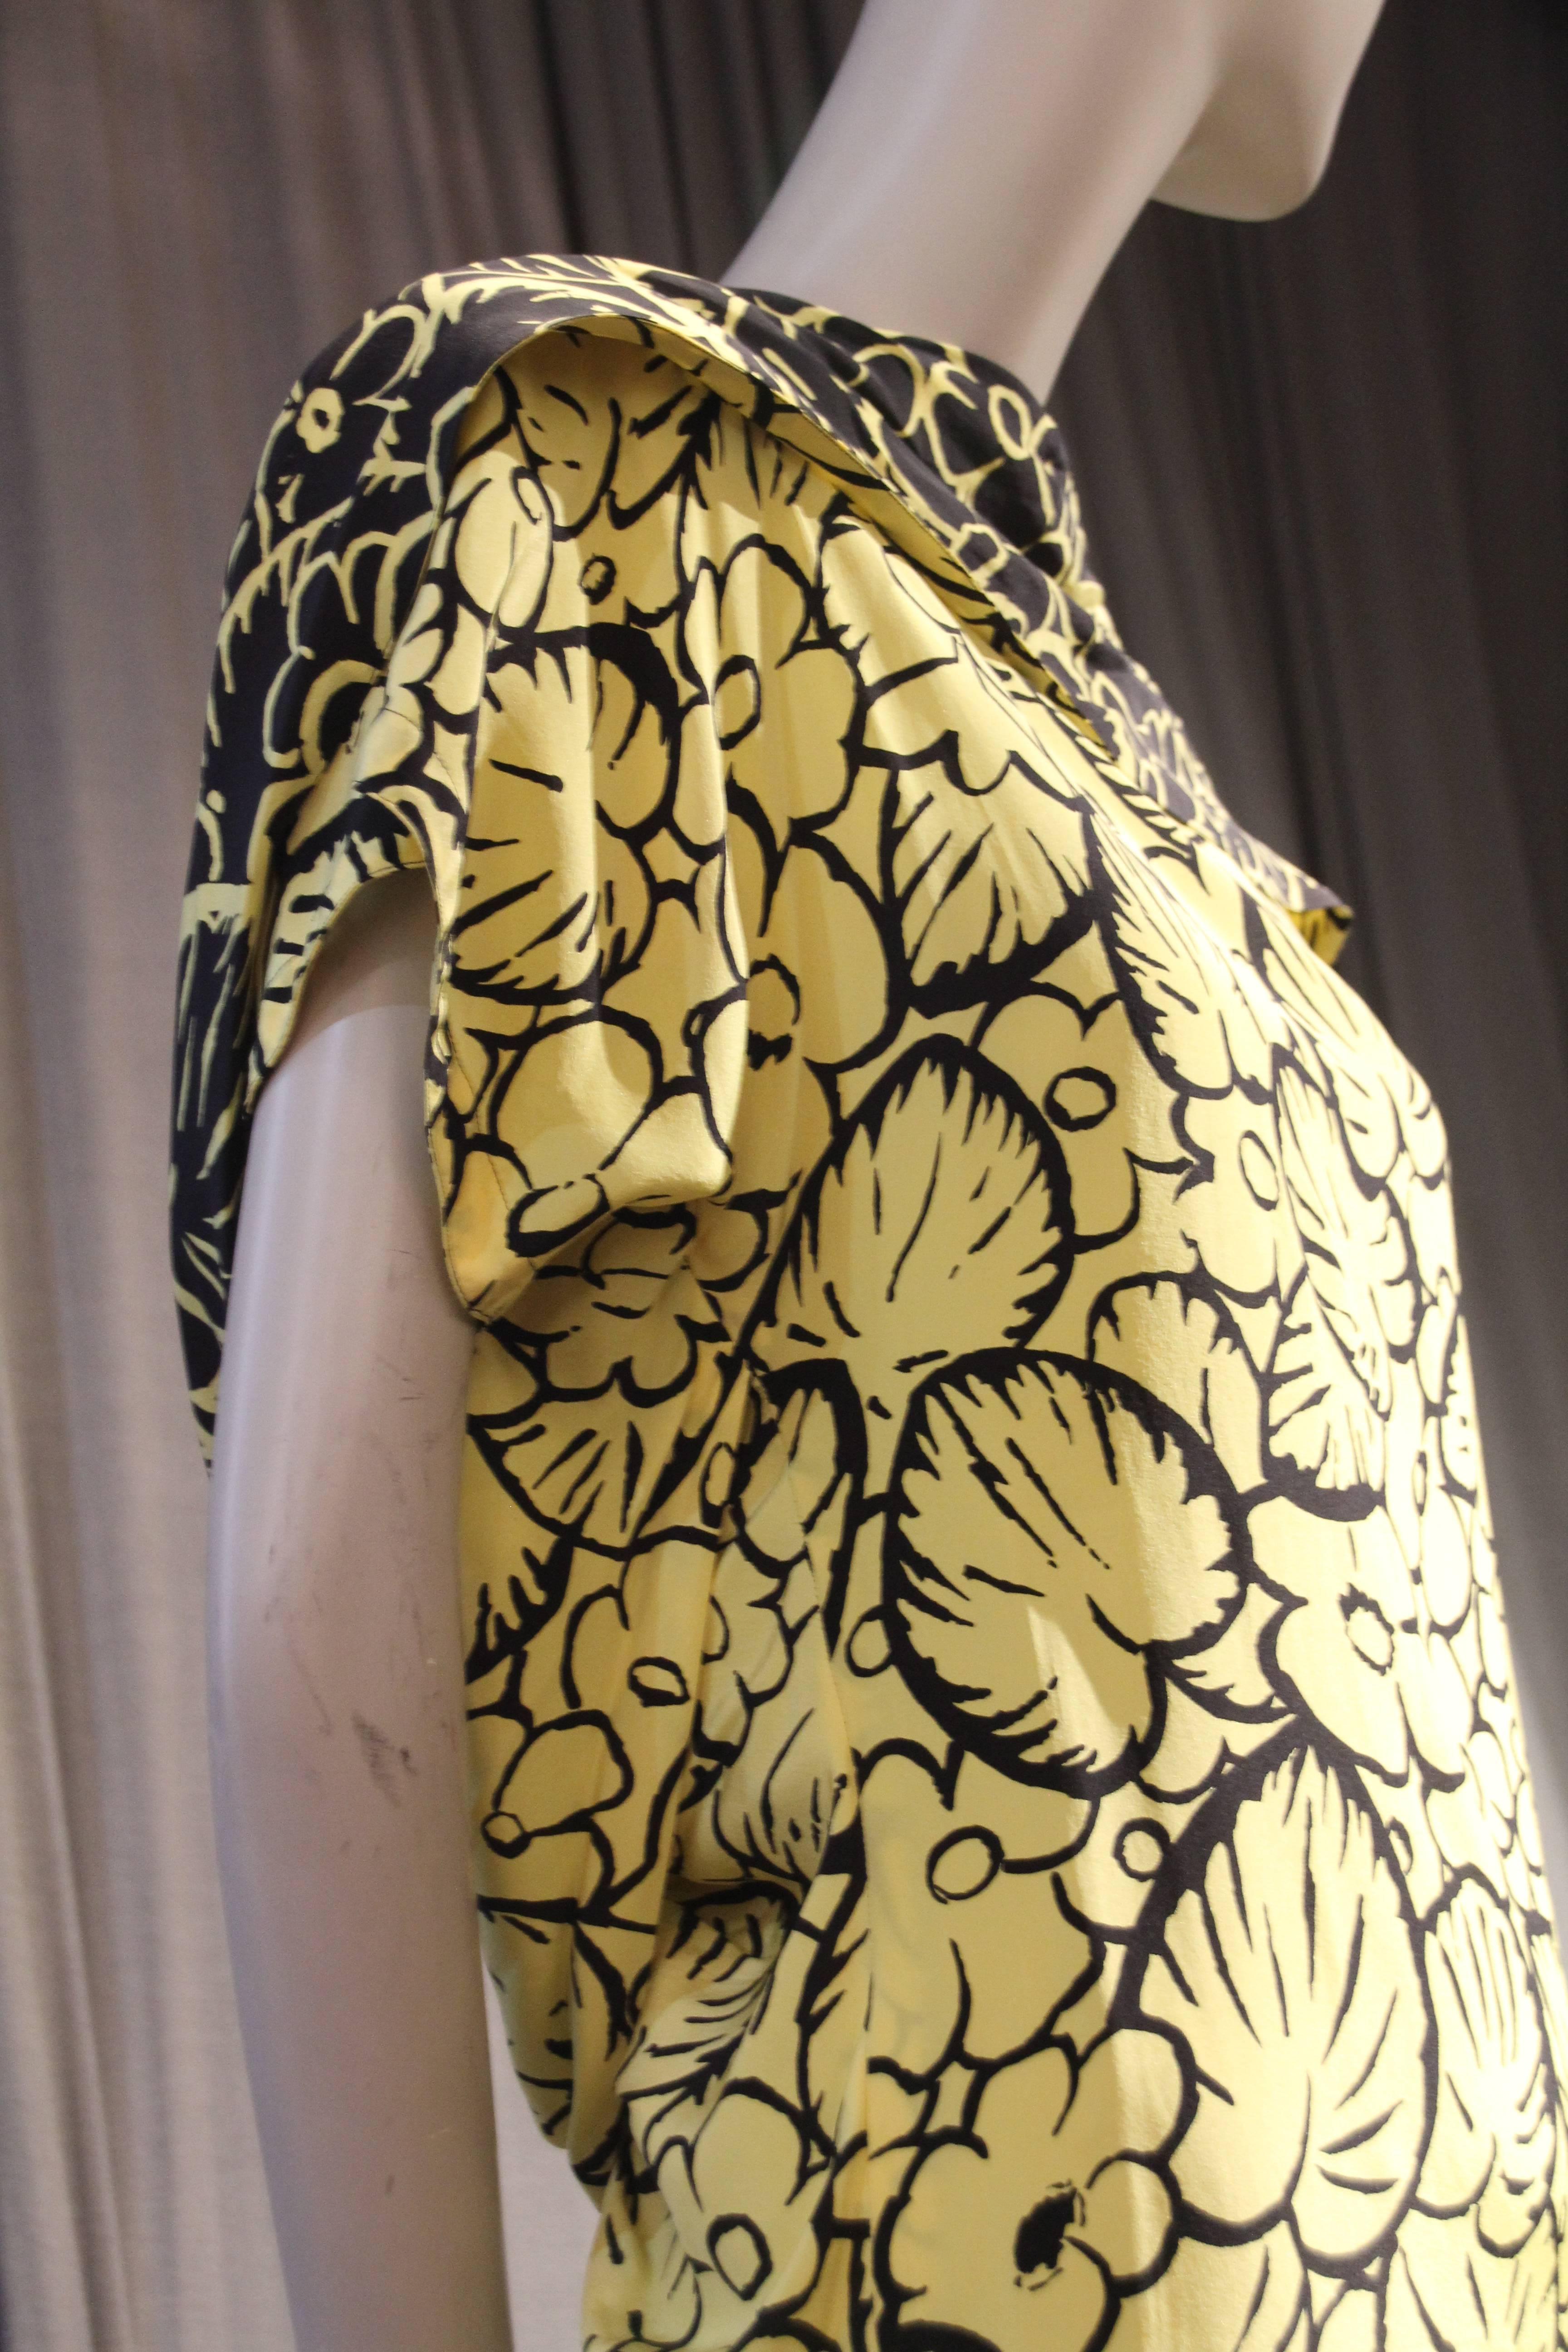 1980s Gianni Versace Yellow and Black Floral Print Silk Dress w Draped Back  In Excellent Condition For Sale In Gresham, OR